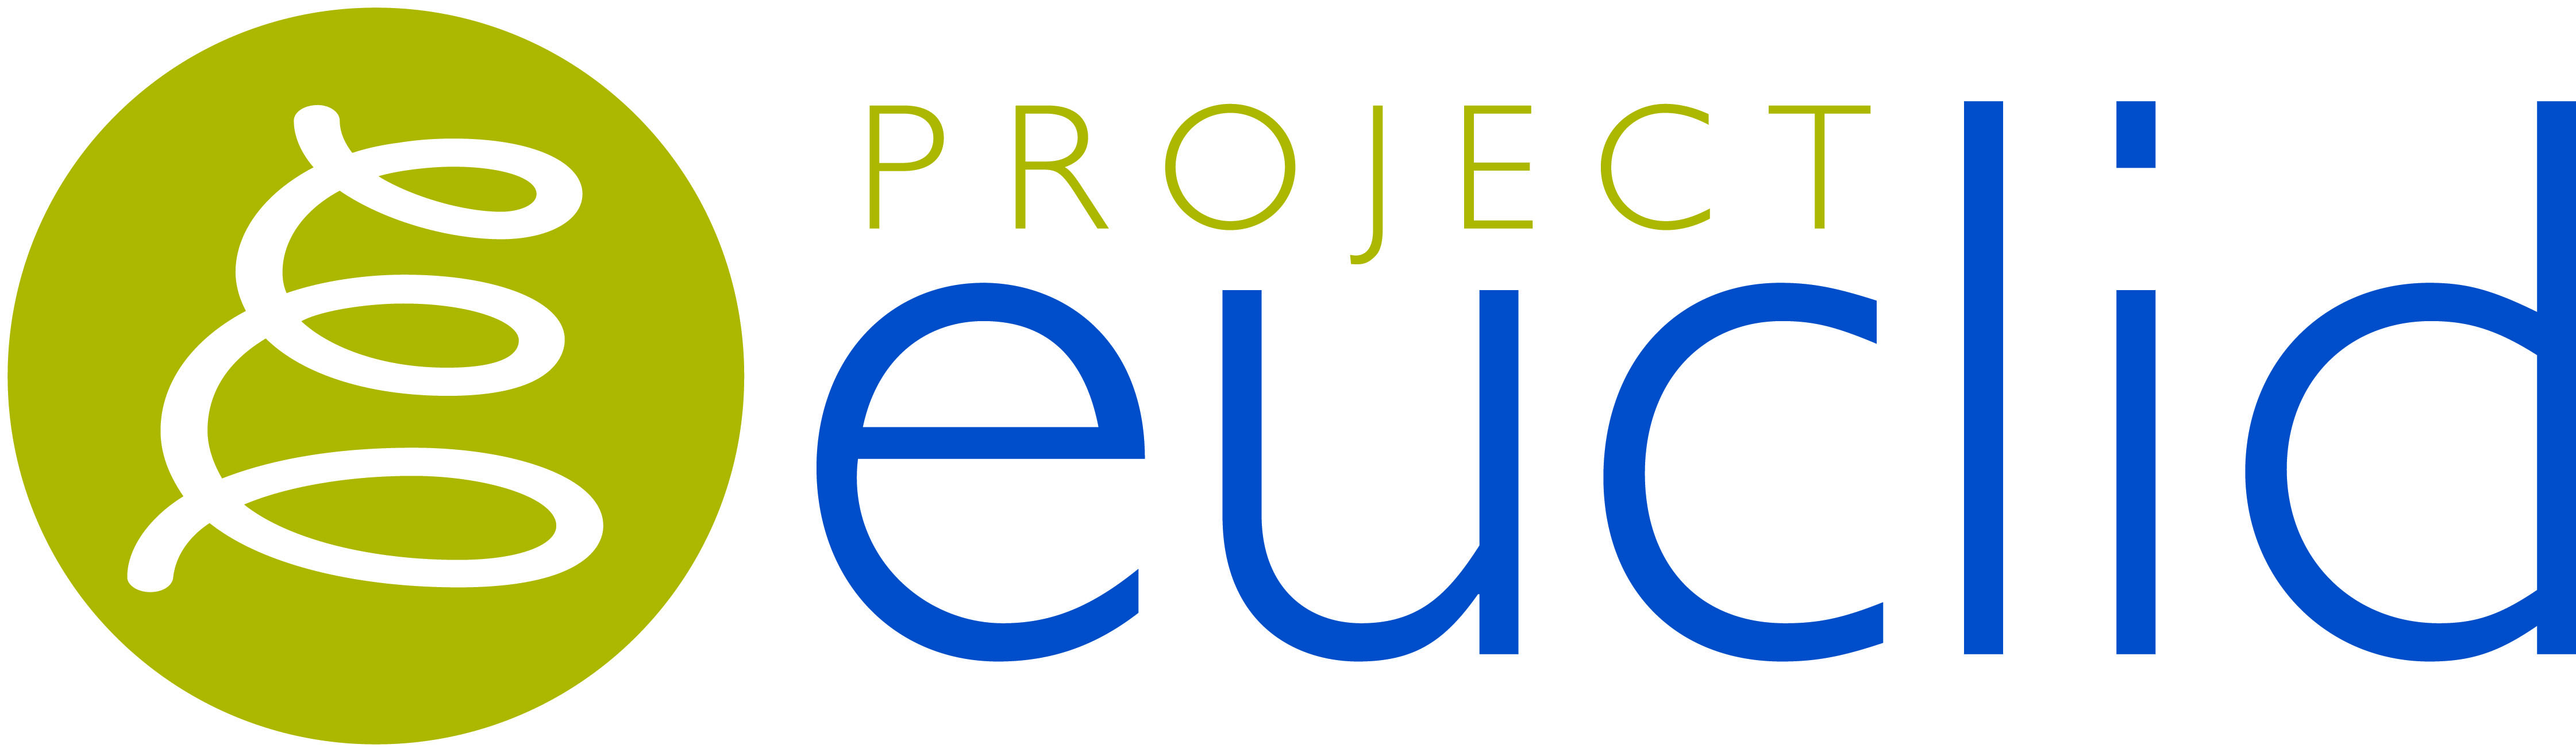 Project Euclid Journals